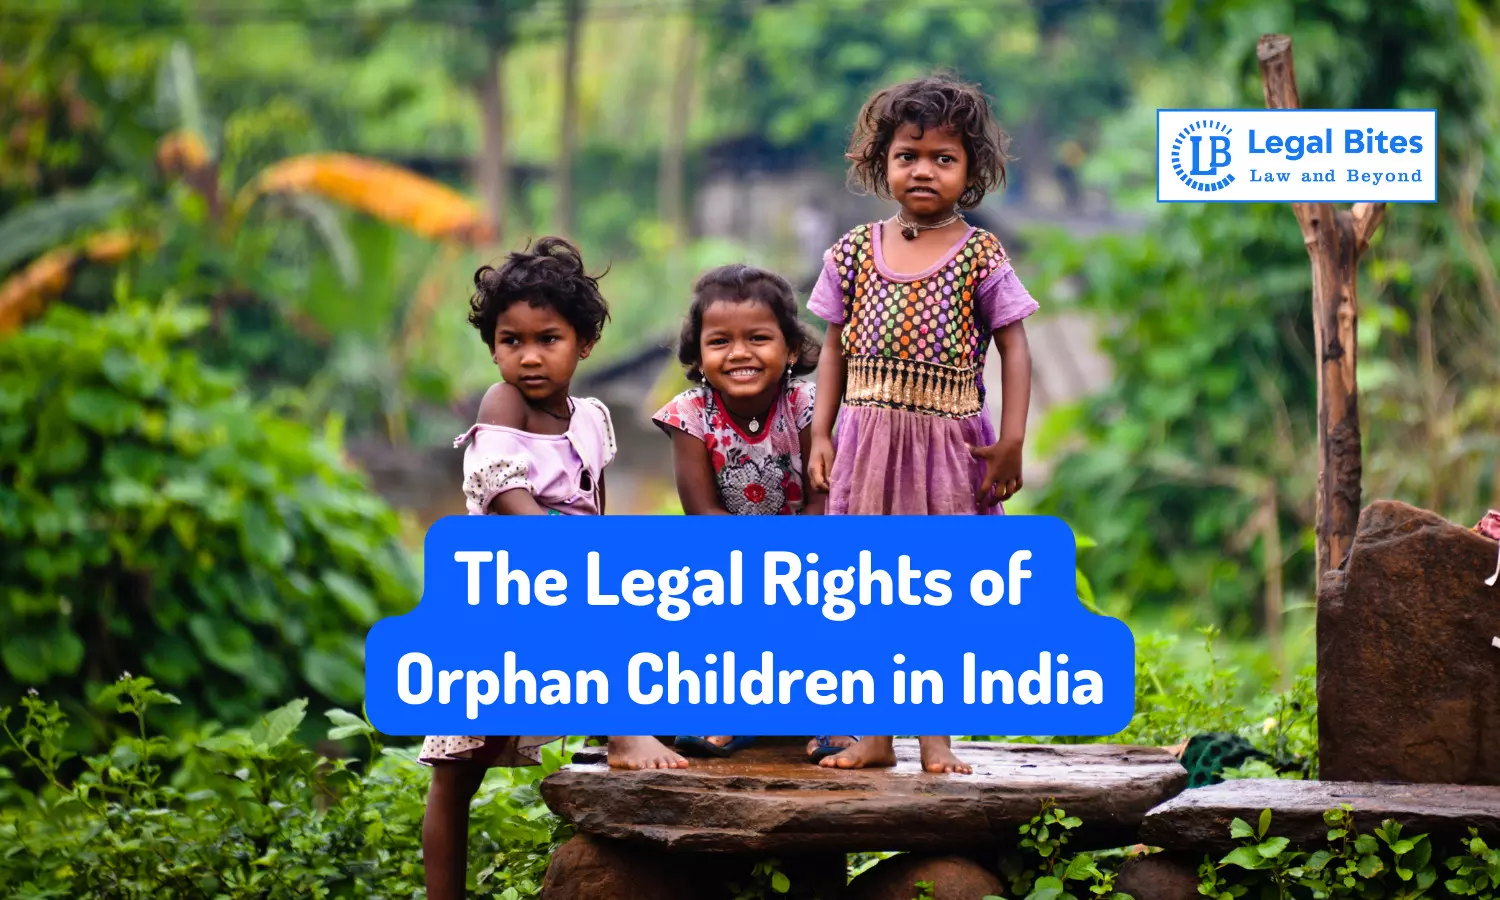 The Legal Rights of Orphan Children in India